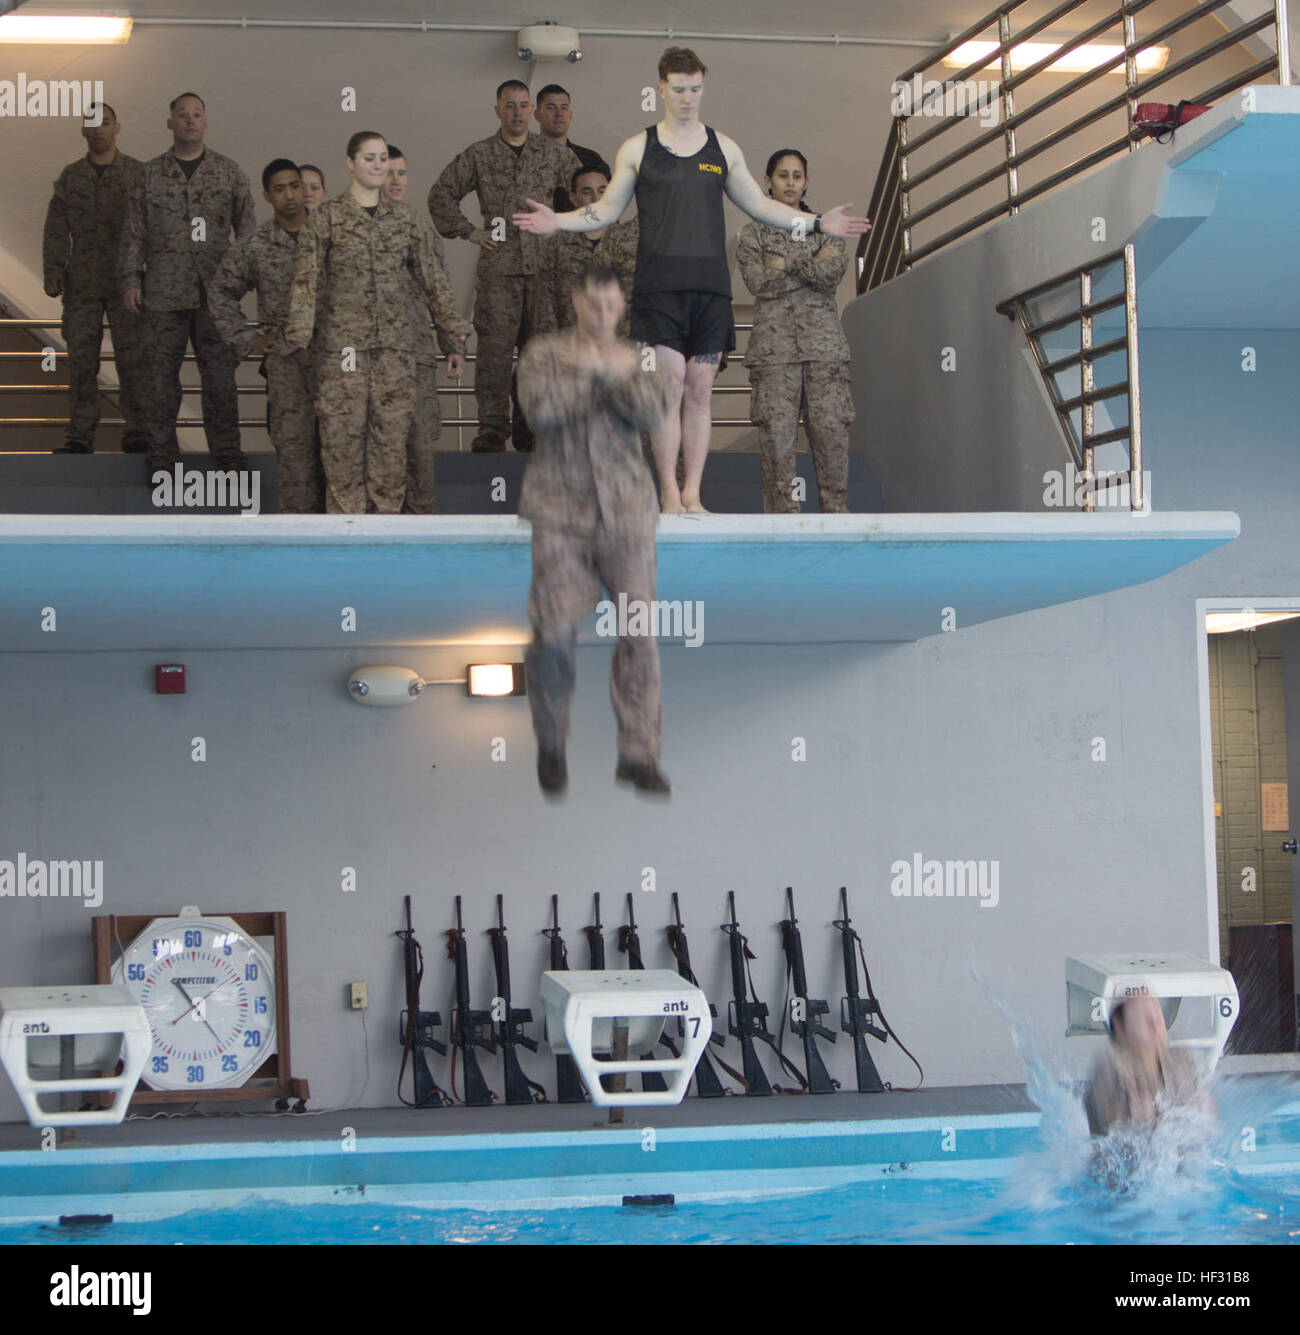 Two Marines step off an eight foot platform into the water during a swim qualification aboard Marine Corps Base Camp Lejeune, March 5, 2015. Marines have to get re-certified in water survival every two years on active duty, or every three years if they pass the intermediate swim qualification. (Official Marine Corps photo by Cpl. Scott W. Whiting) Marines get their feet wet during swim qualification 150305-M-FD819-578 Stock Photo